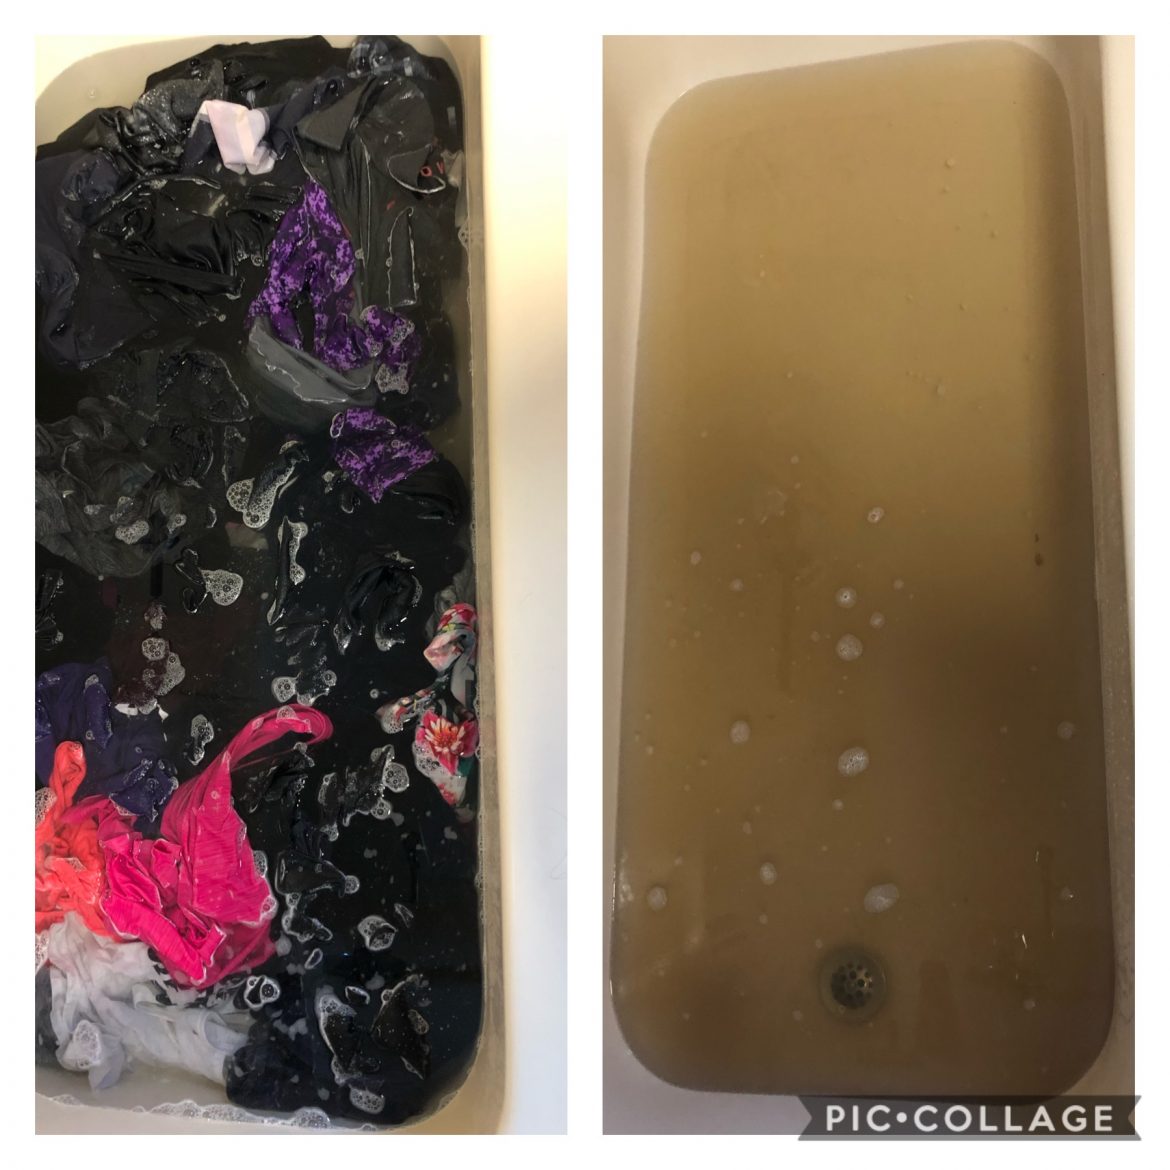 The before and after of laundry stripping.